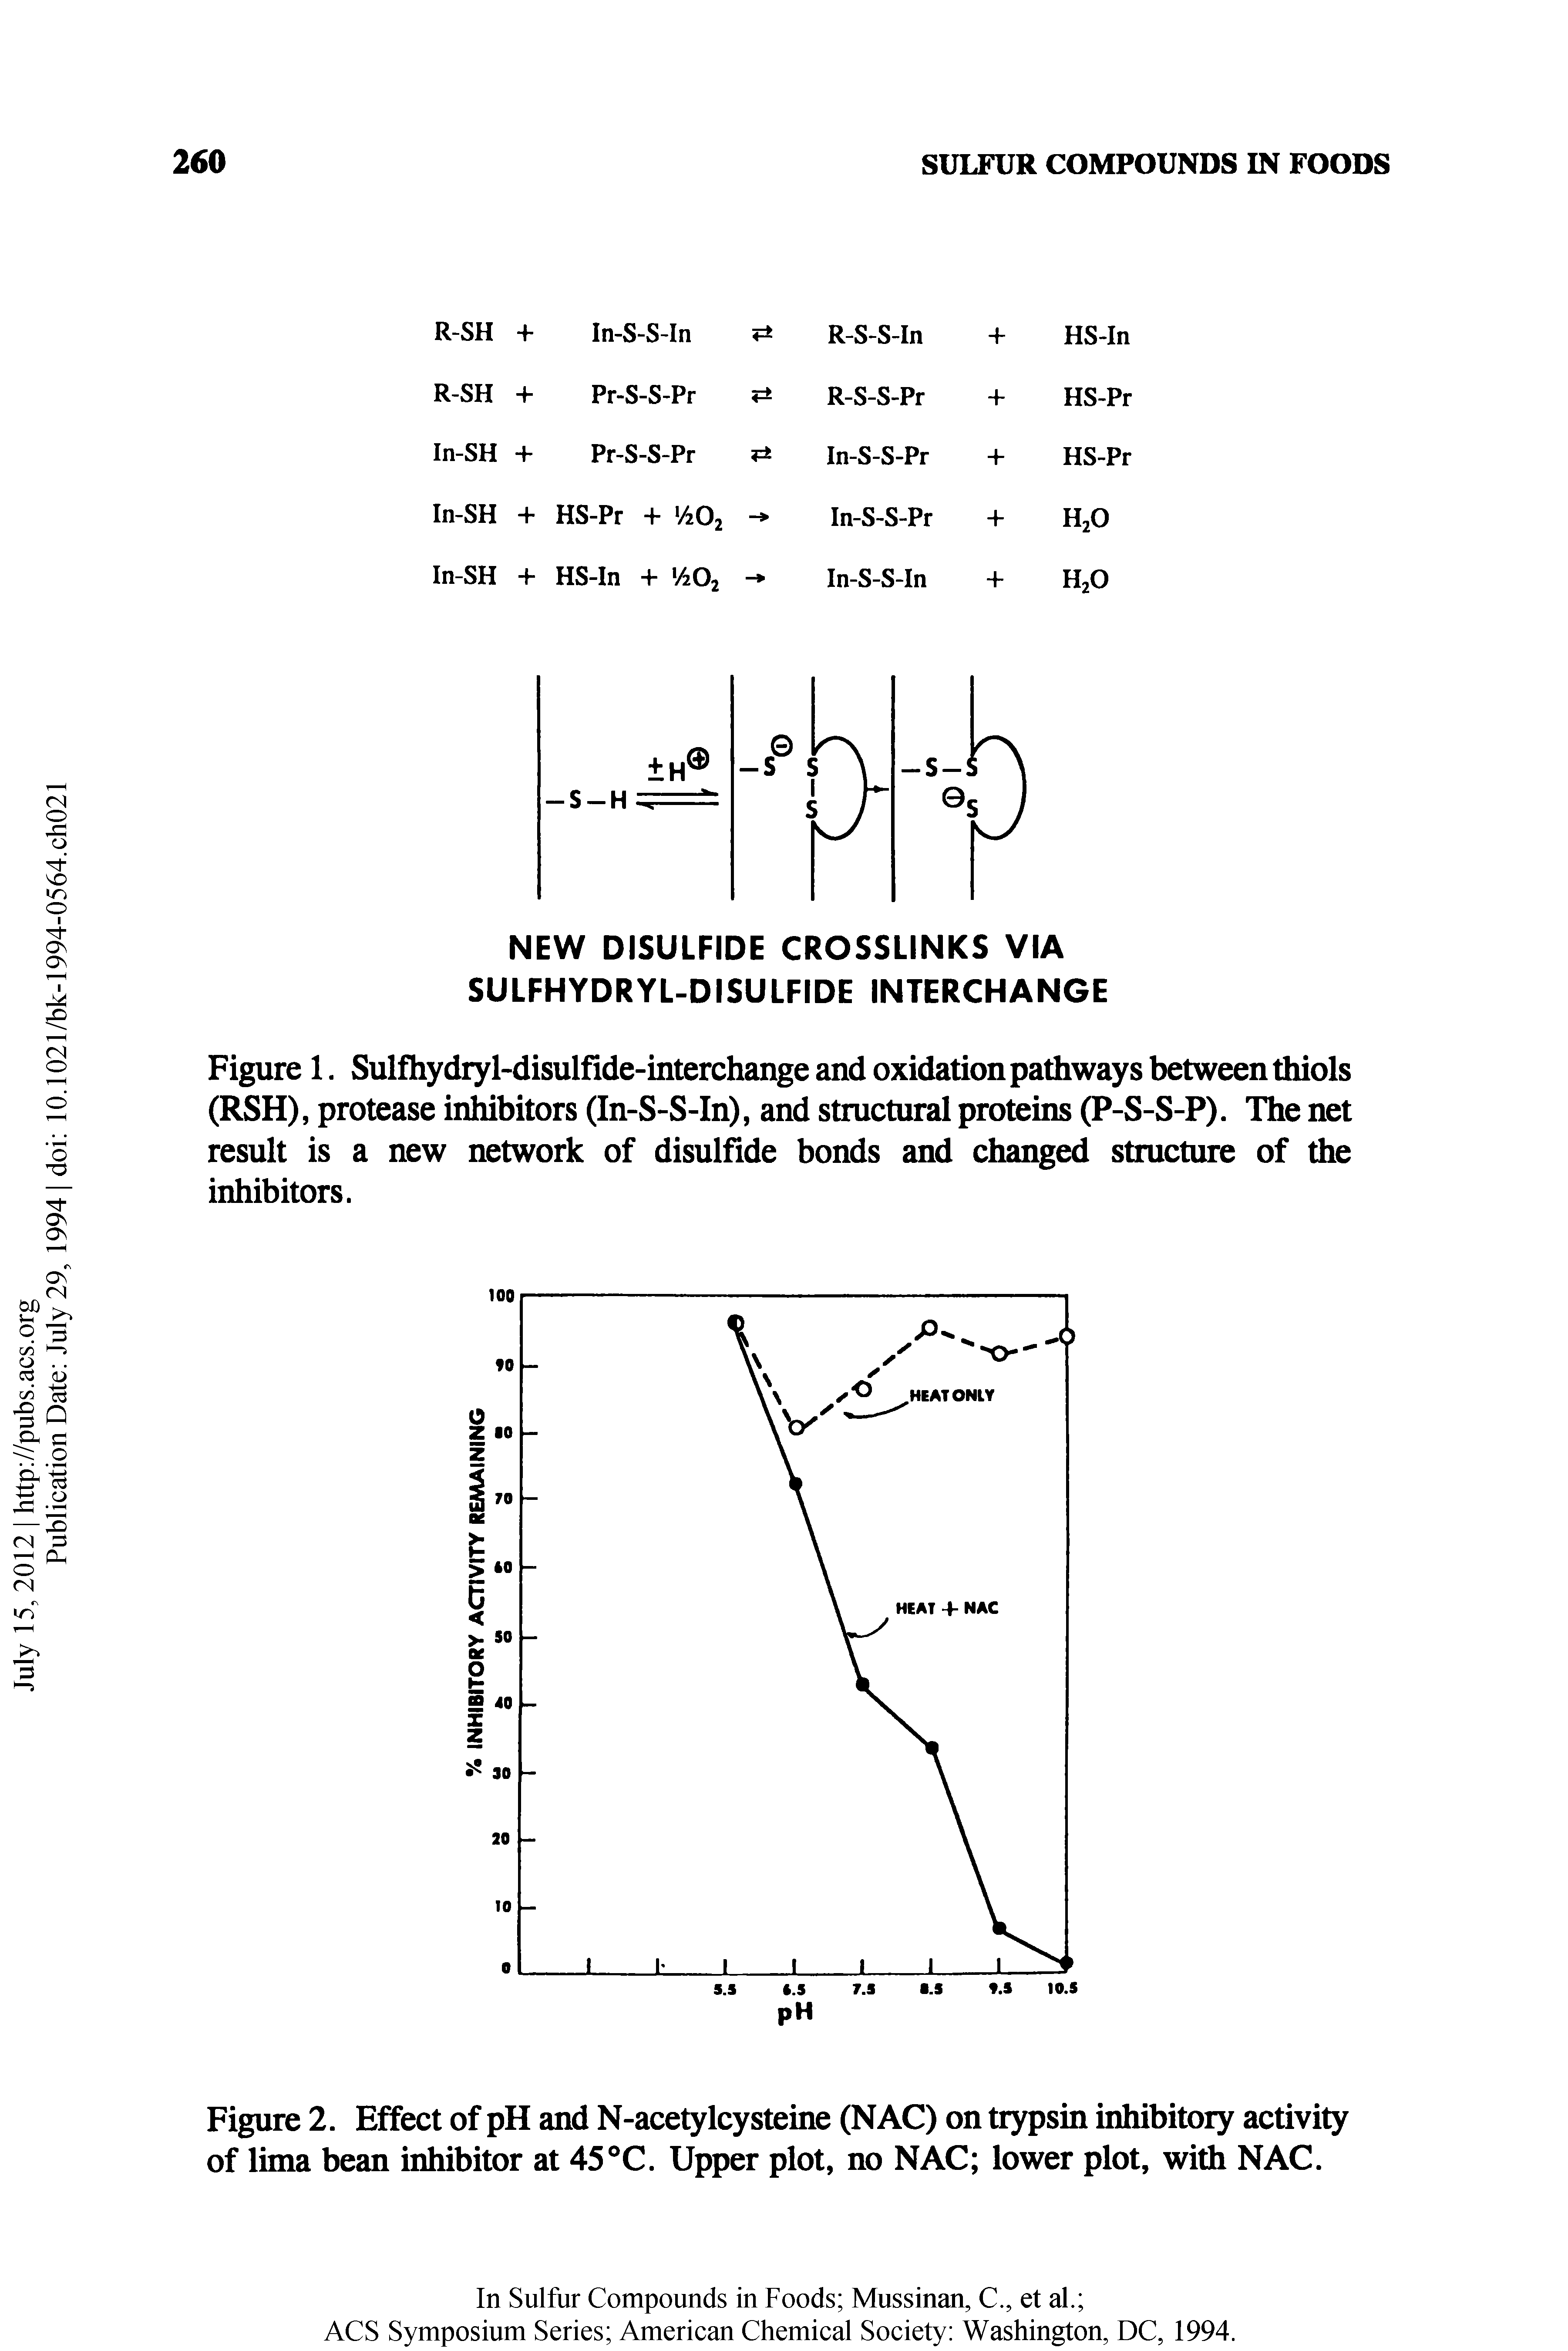 Figure 2. Effect of pH and N-acetylcysteine (NAC) on trypsin inhibitory activity of lima bean inhibitor at 45 C. Upper plot, no NAC lower plot, with NAC.